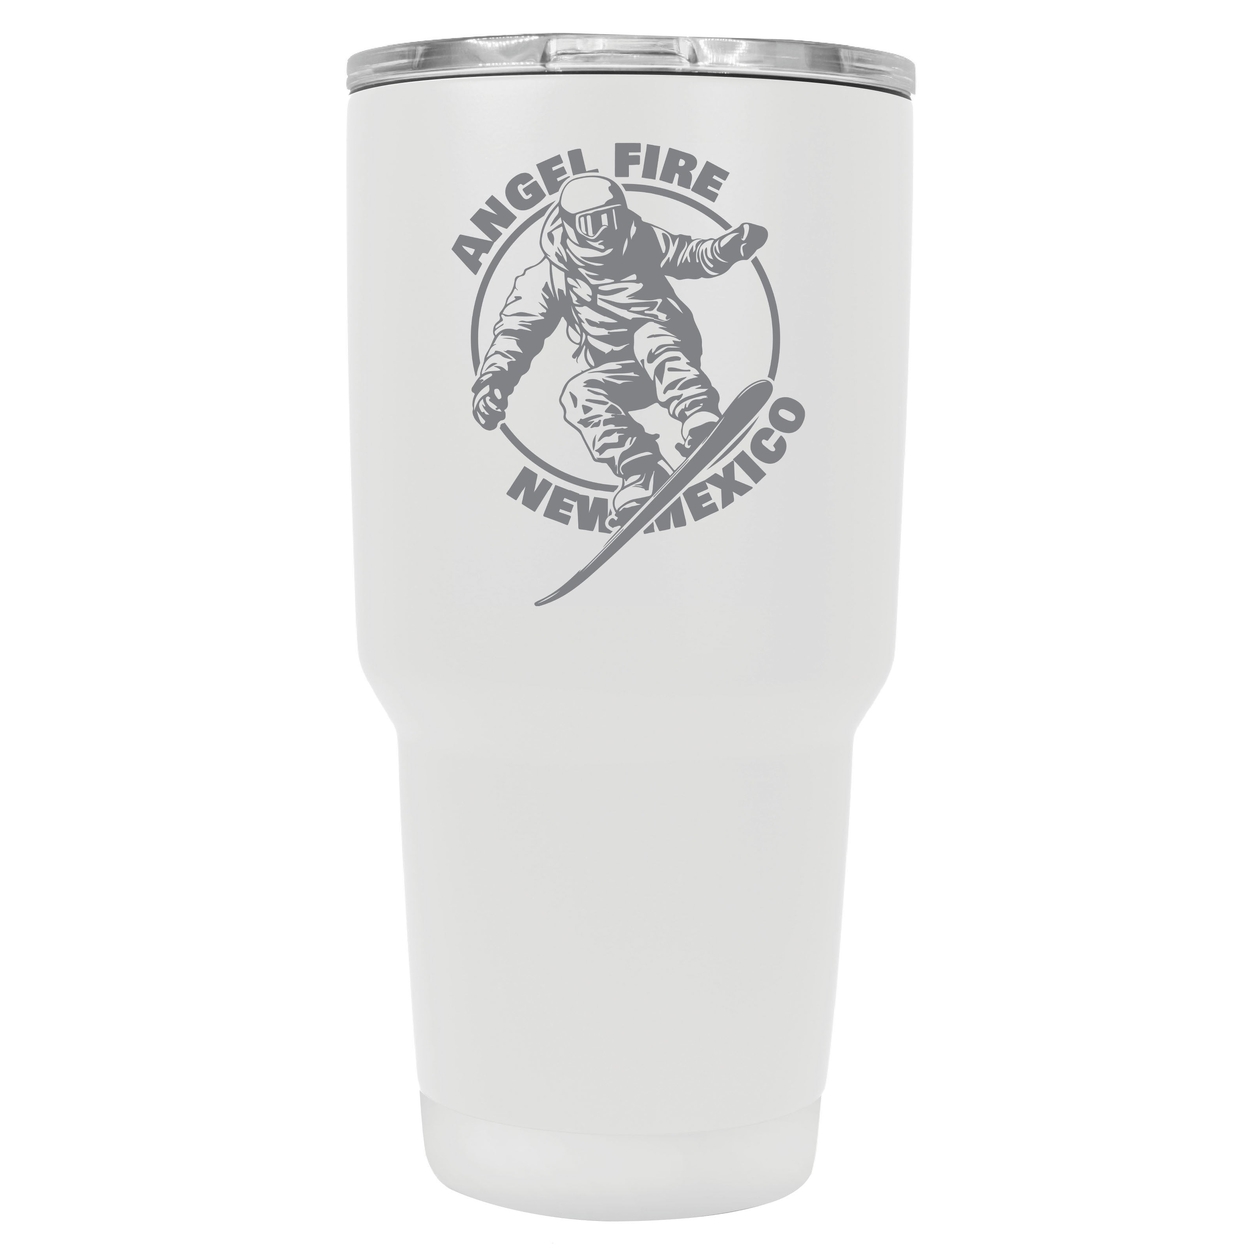 Angel Fire New Mexico Souvenir 24 Oz Engraved Insulated Stainless Steel Tumbler - Green,,Single Unit